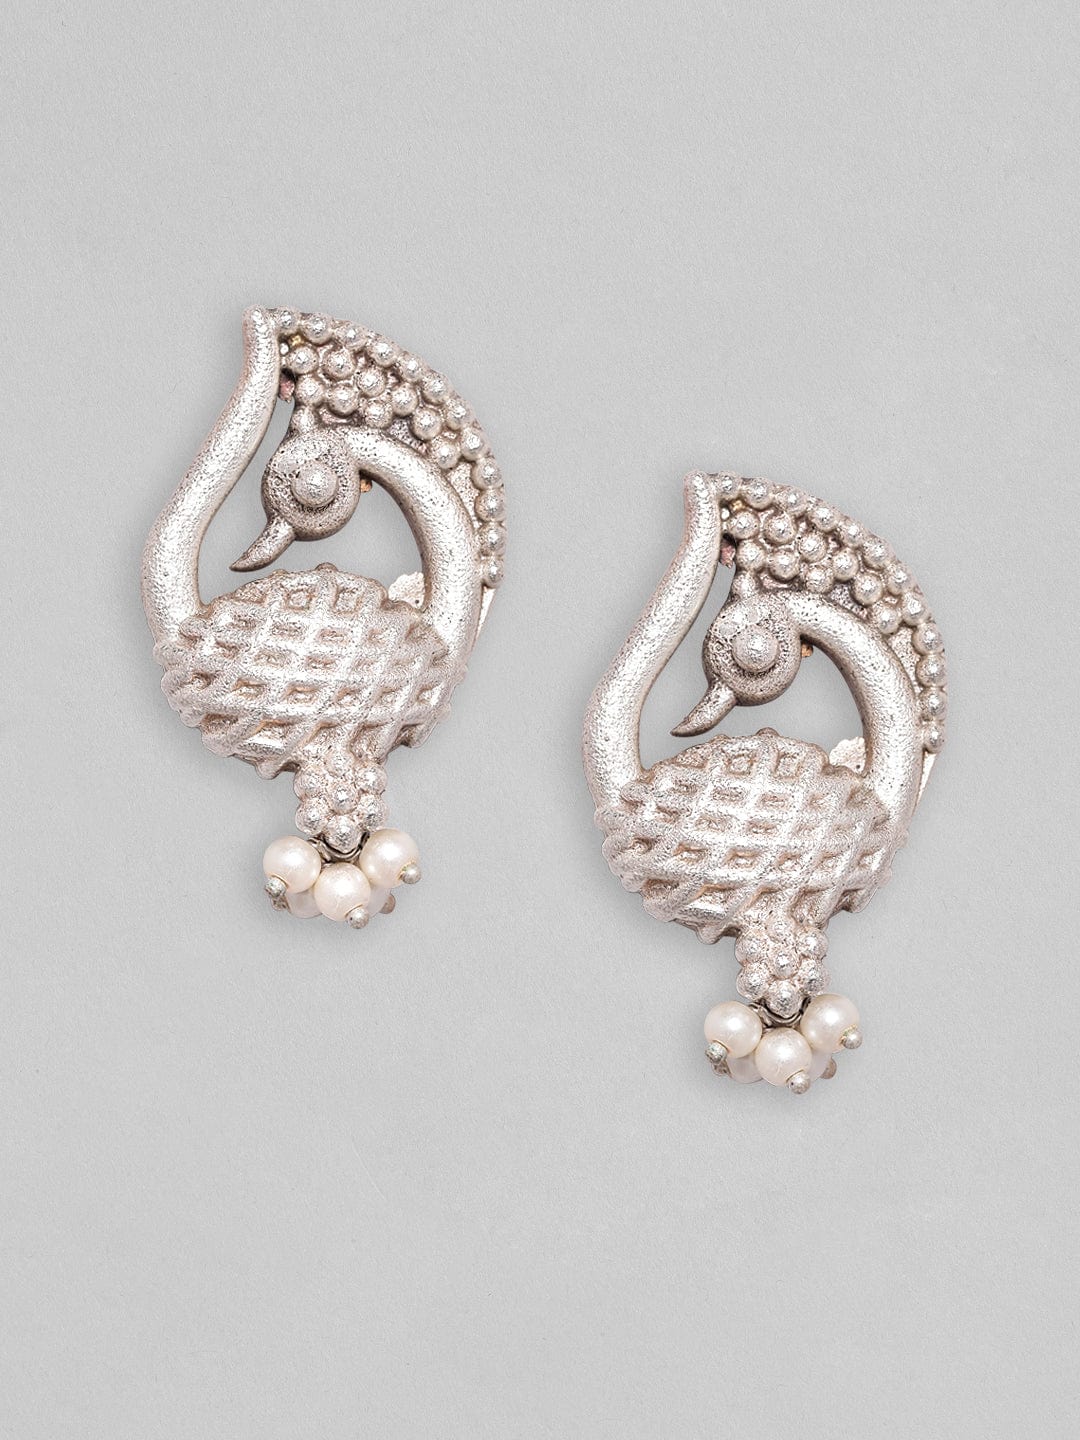 Rubans Silver Plated Earrings With Handcrafted Peacock Design And Silver Beads Earrings